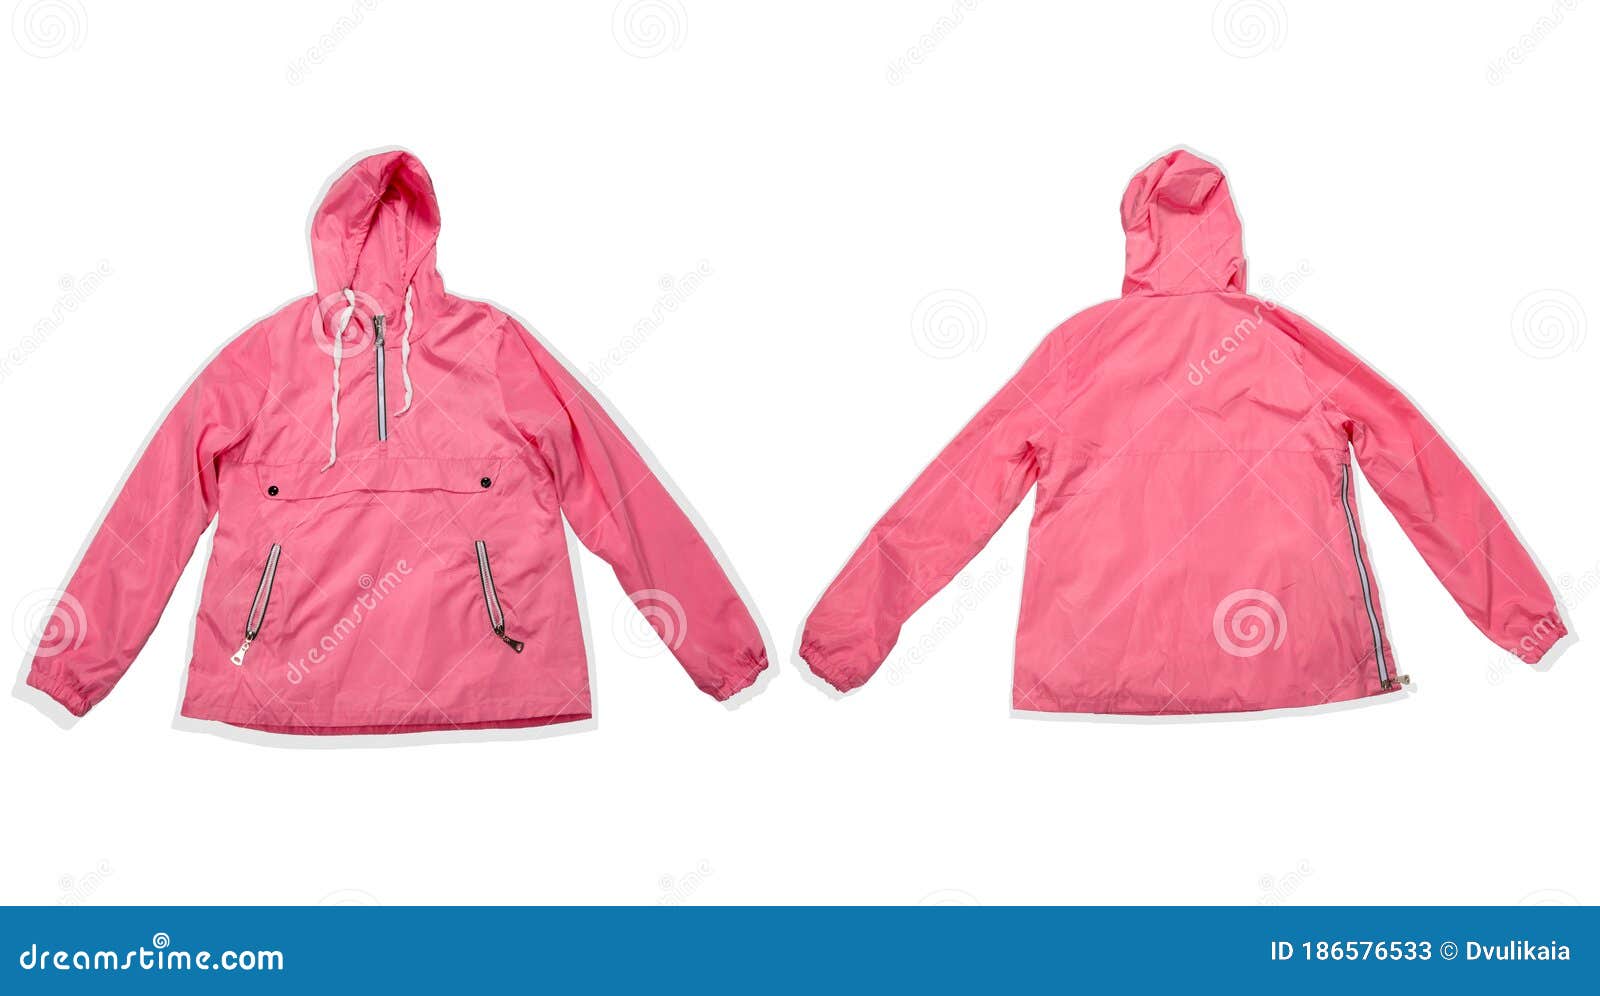 2 672 Jacket Mock Up Photos Free Royalty Free Stock Photos From Dreamstime